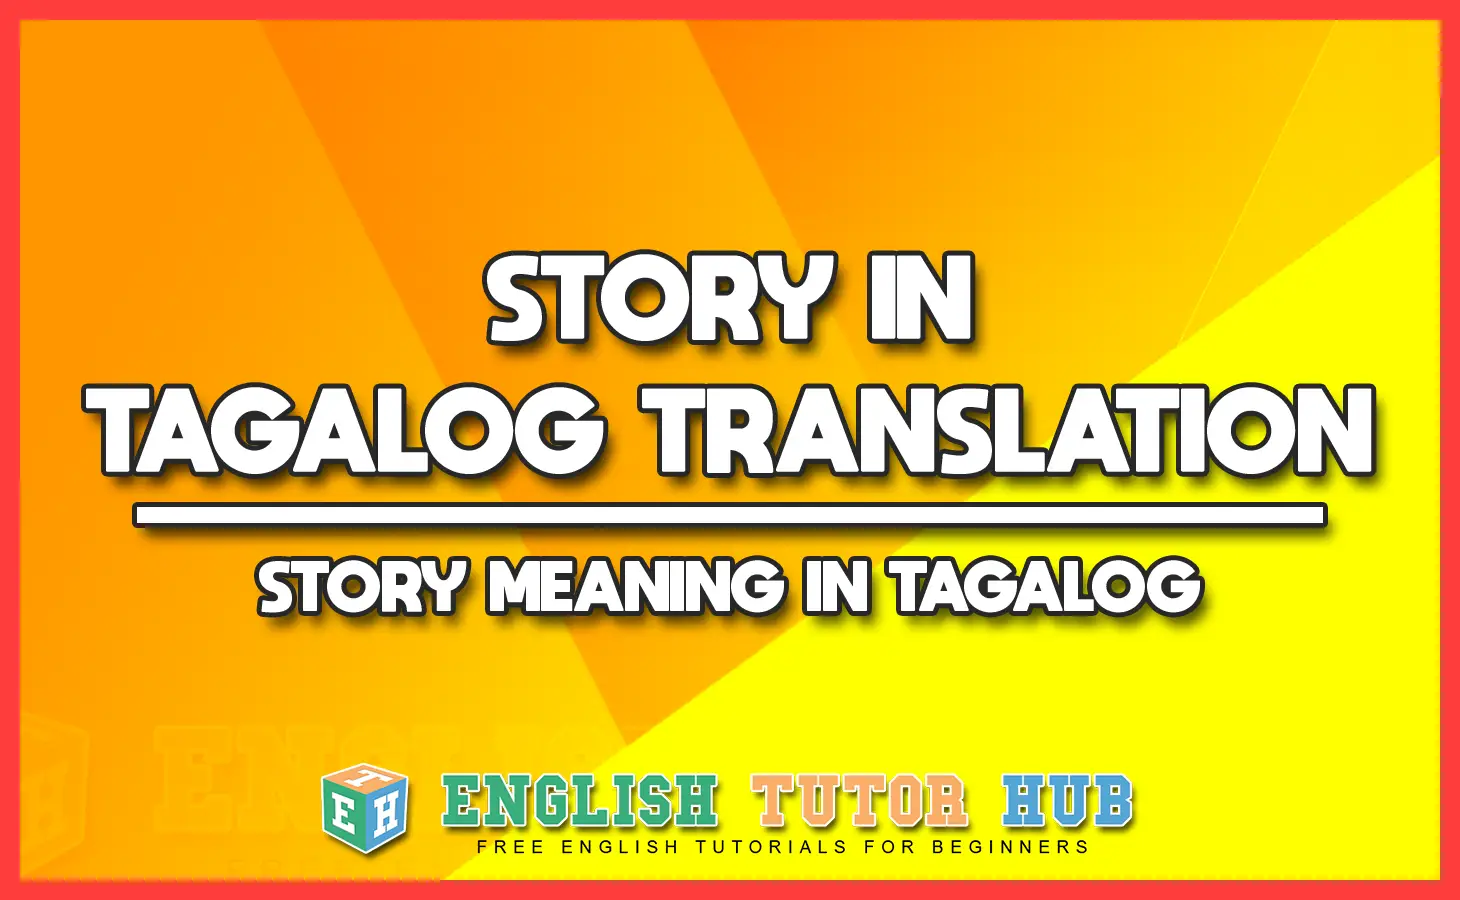 STORY IN TAGALOG TRANSLATION - STORY MEANING IN TAGALOG